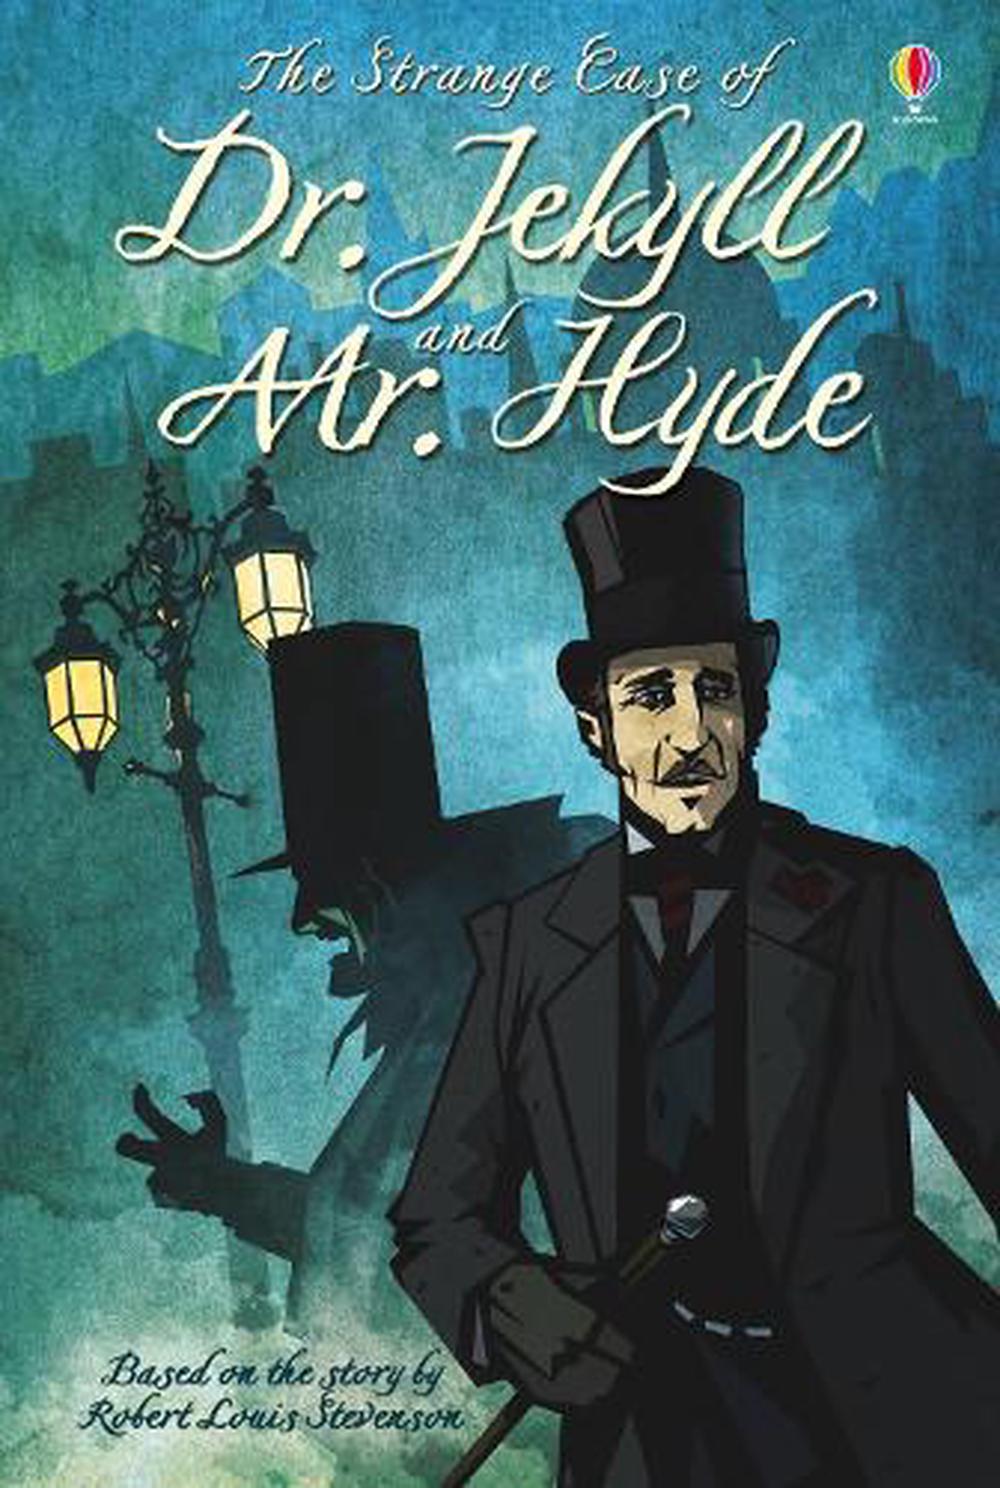 the strange case of dr jekyll and mr hyde essay